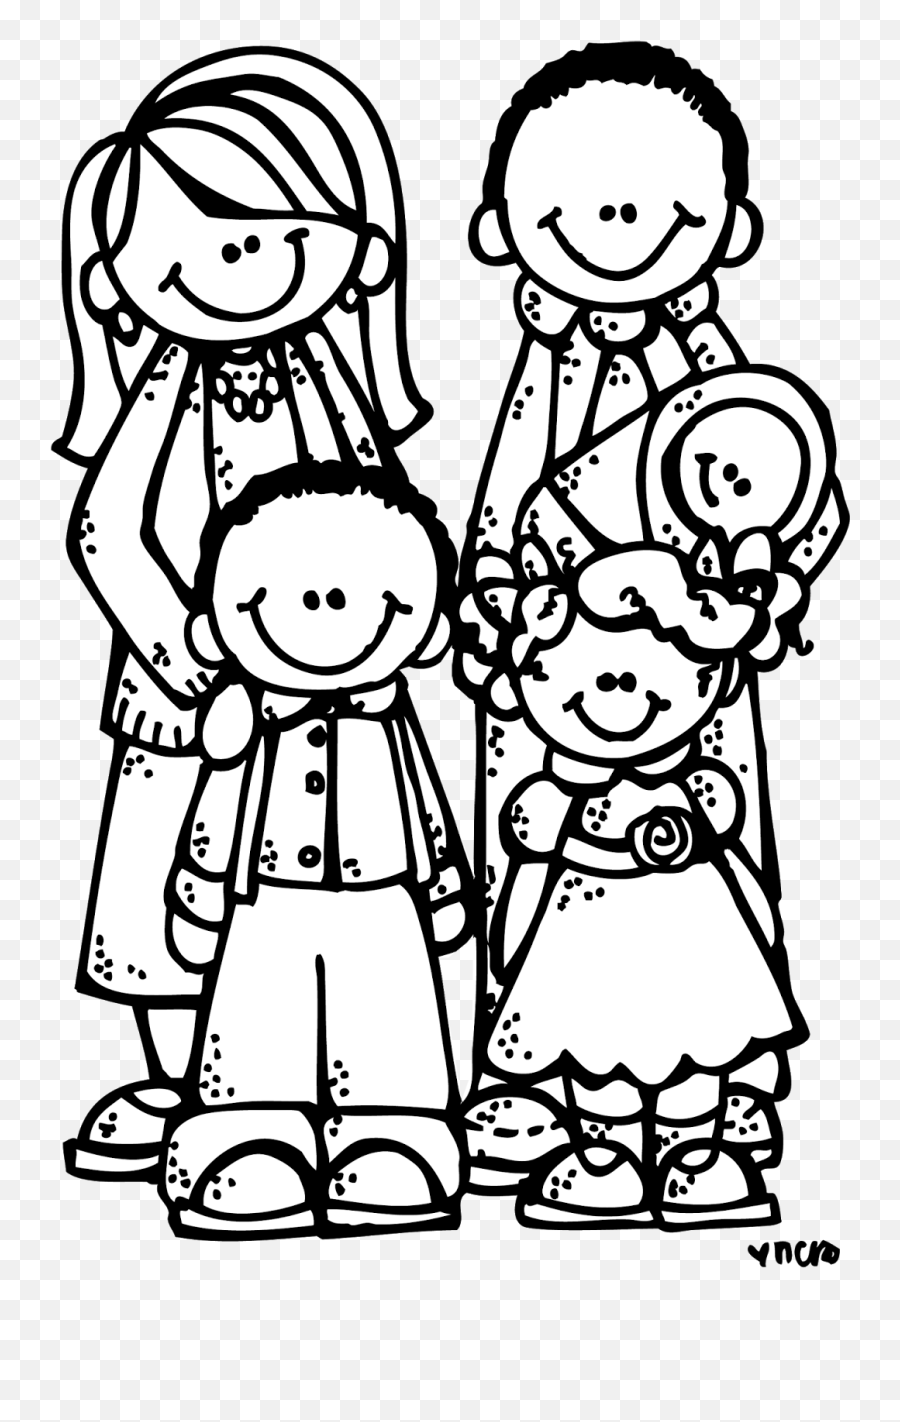 Familyacmelonheadz13bwpng 10311600 Pixels Clip - Black And White Clip Art Family,Family Clipart Png